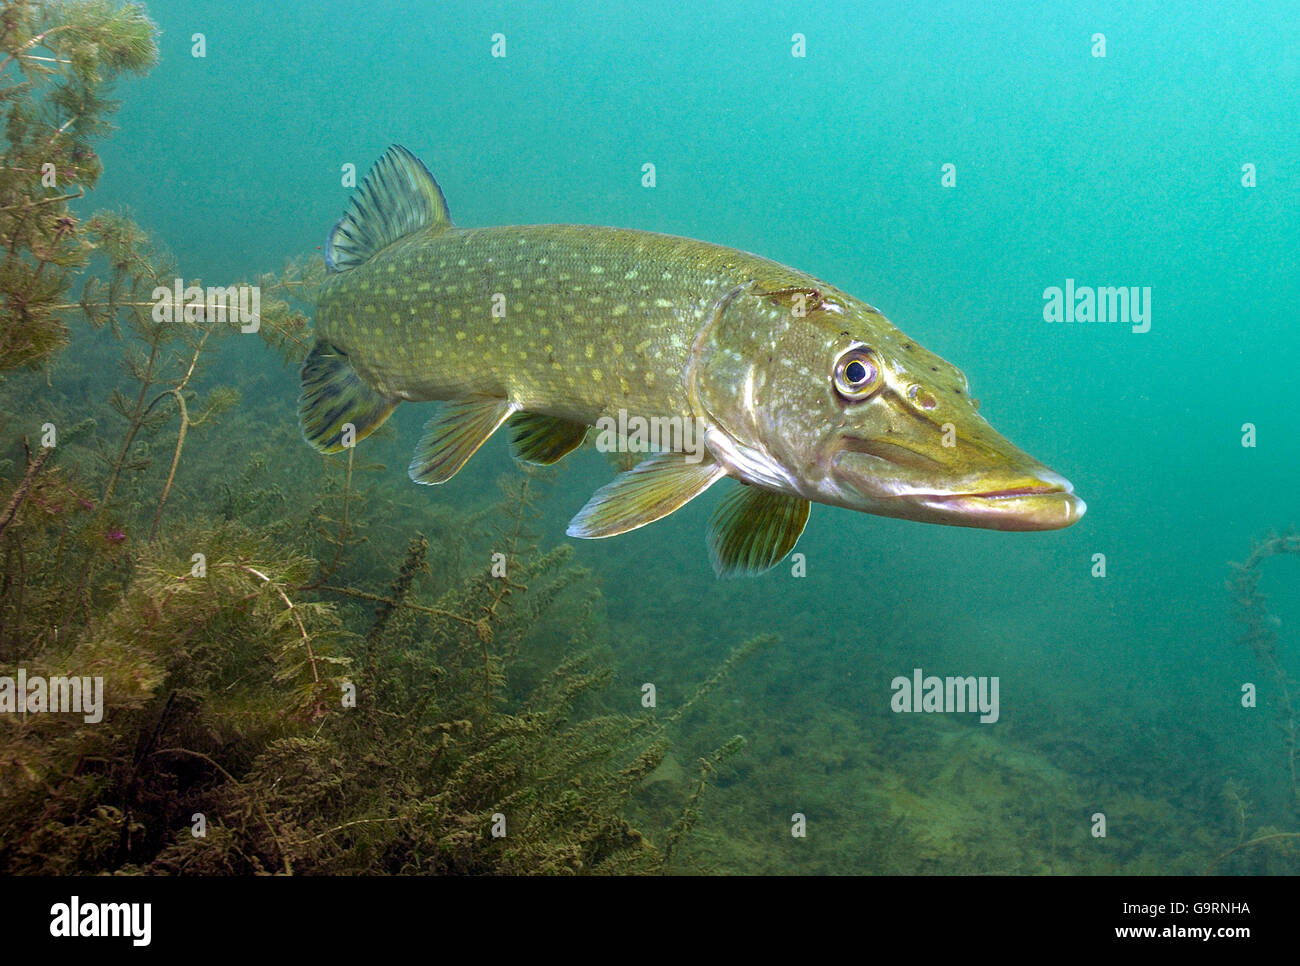 Northern pike / (Esox lucius) Stock Photo